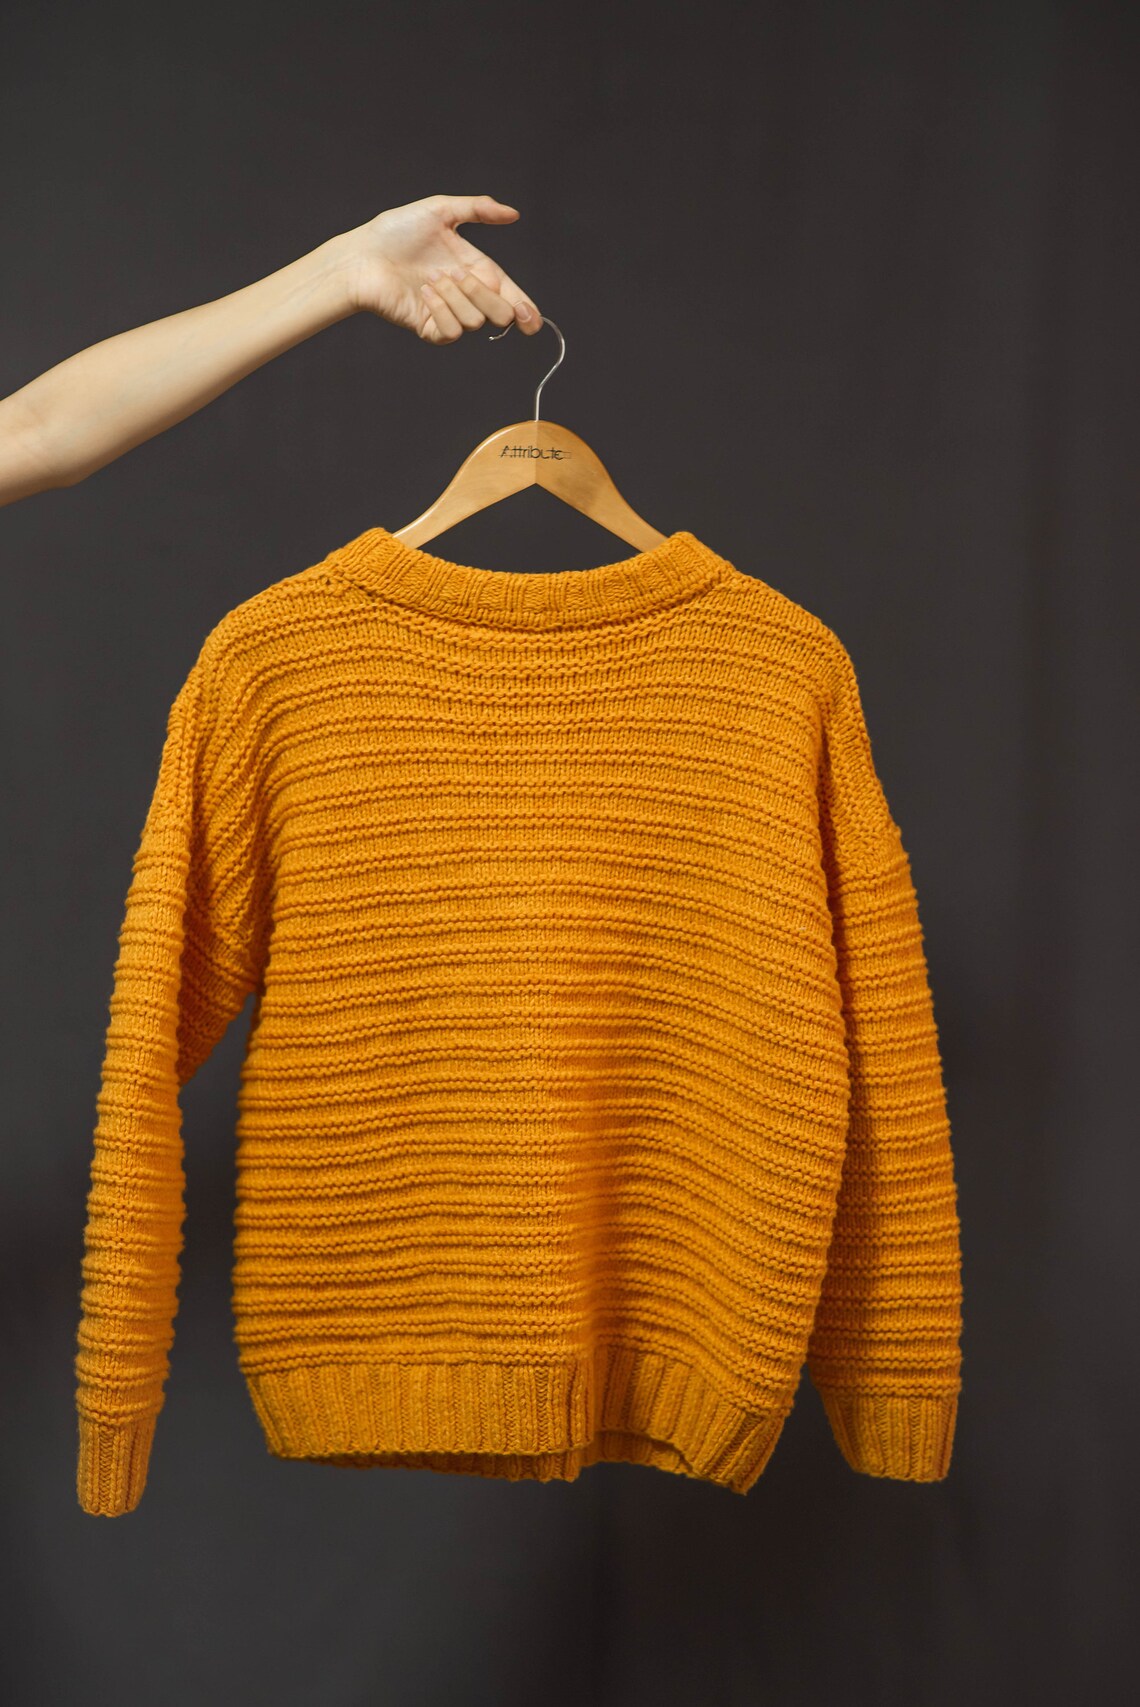 Chunky knit orange pullover Cable knit sweater Oversized wool | Etsy